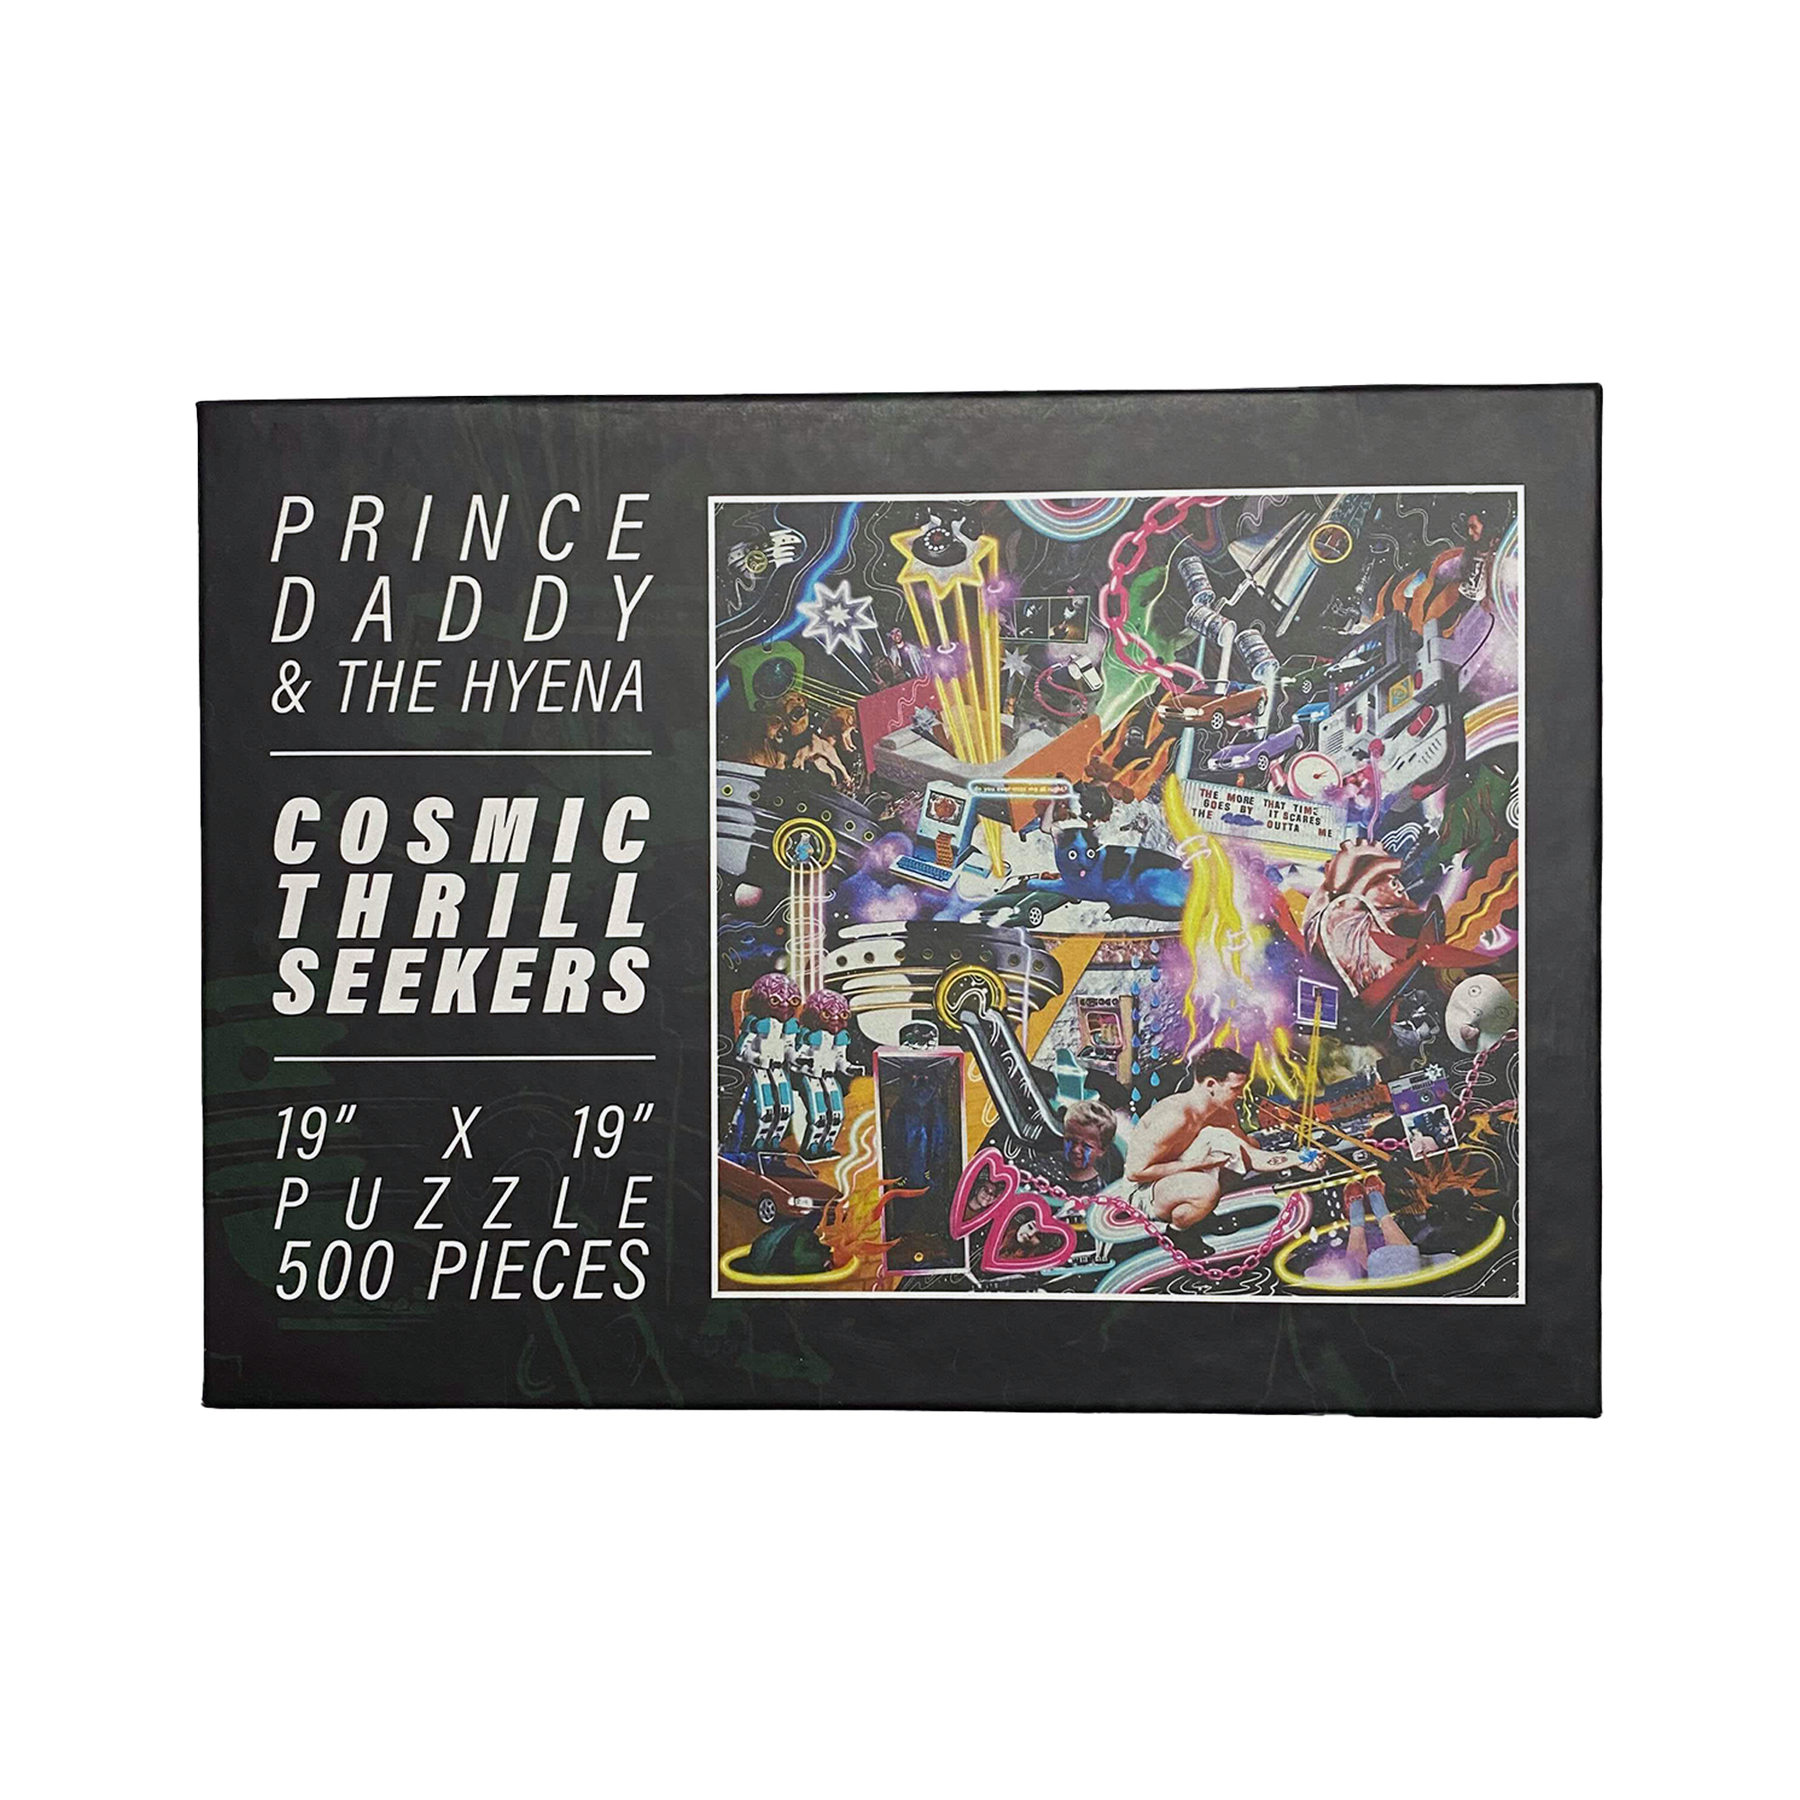 Prince Daddy & The Hyena - Cosmic Thrill Seekers Puzzle